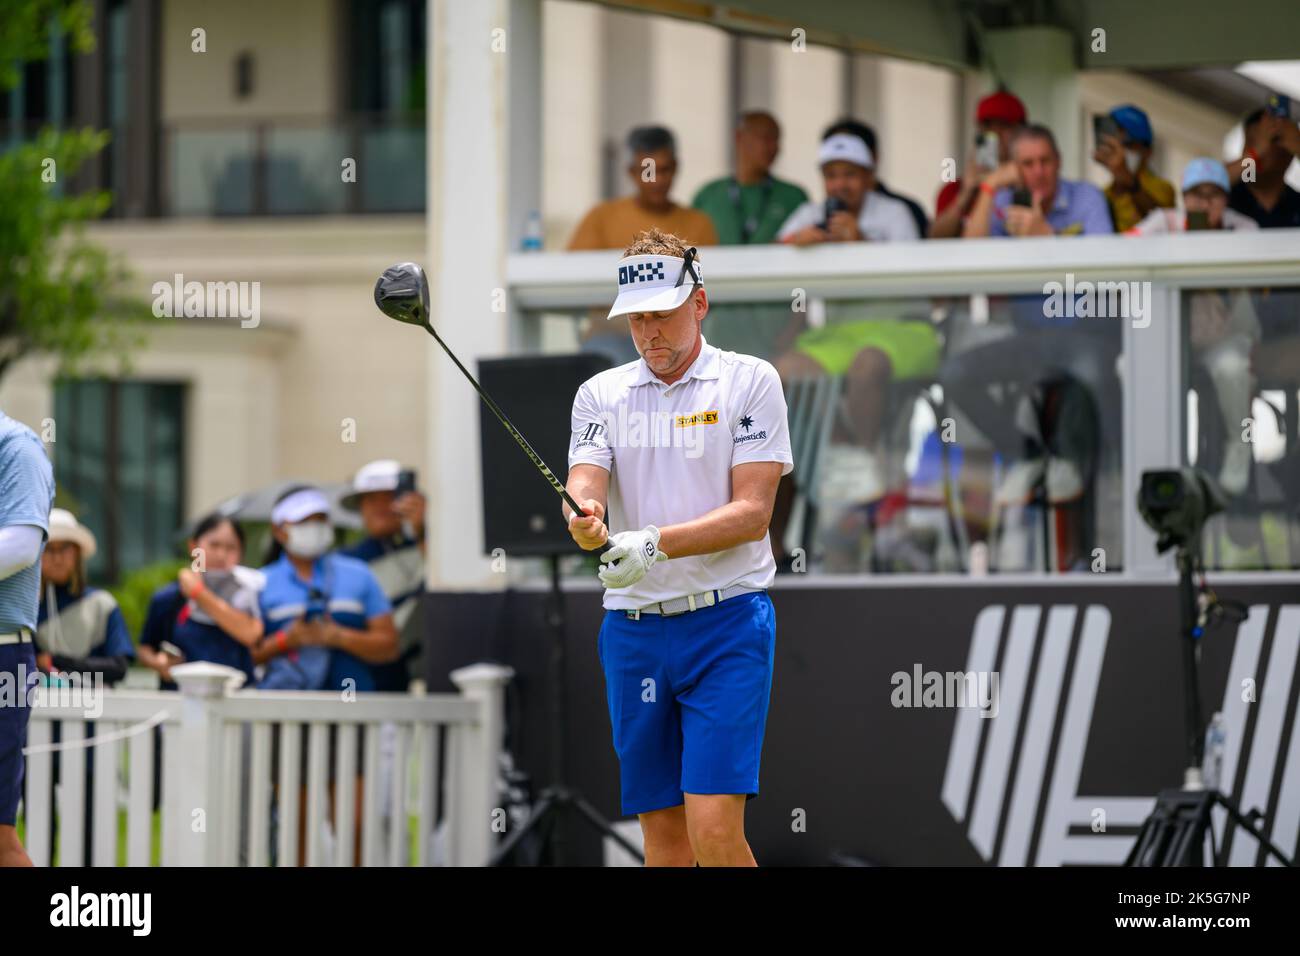 Ian Poulter of England prepares to hit at 10 during the 2nd round of the LIV Golf Invitational Bangkok at Stonehill Golf Course in Bangkok, THAILAND Stock Photo